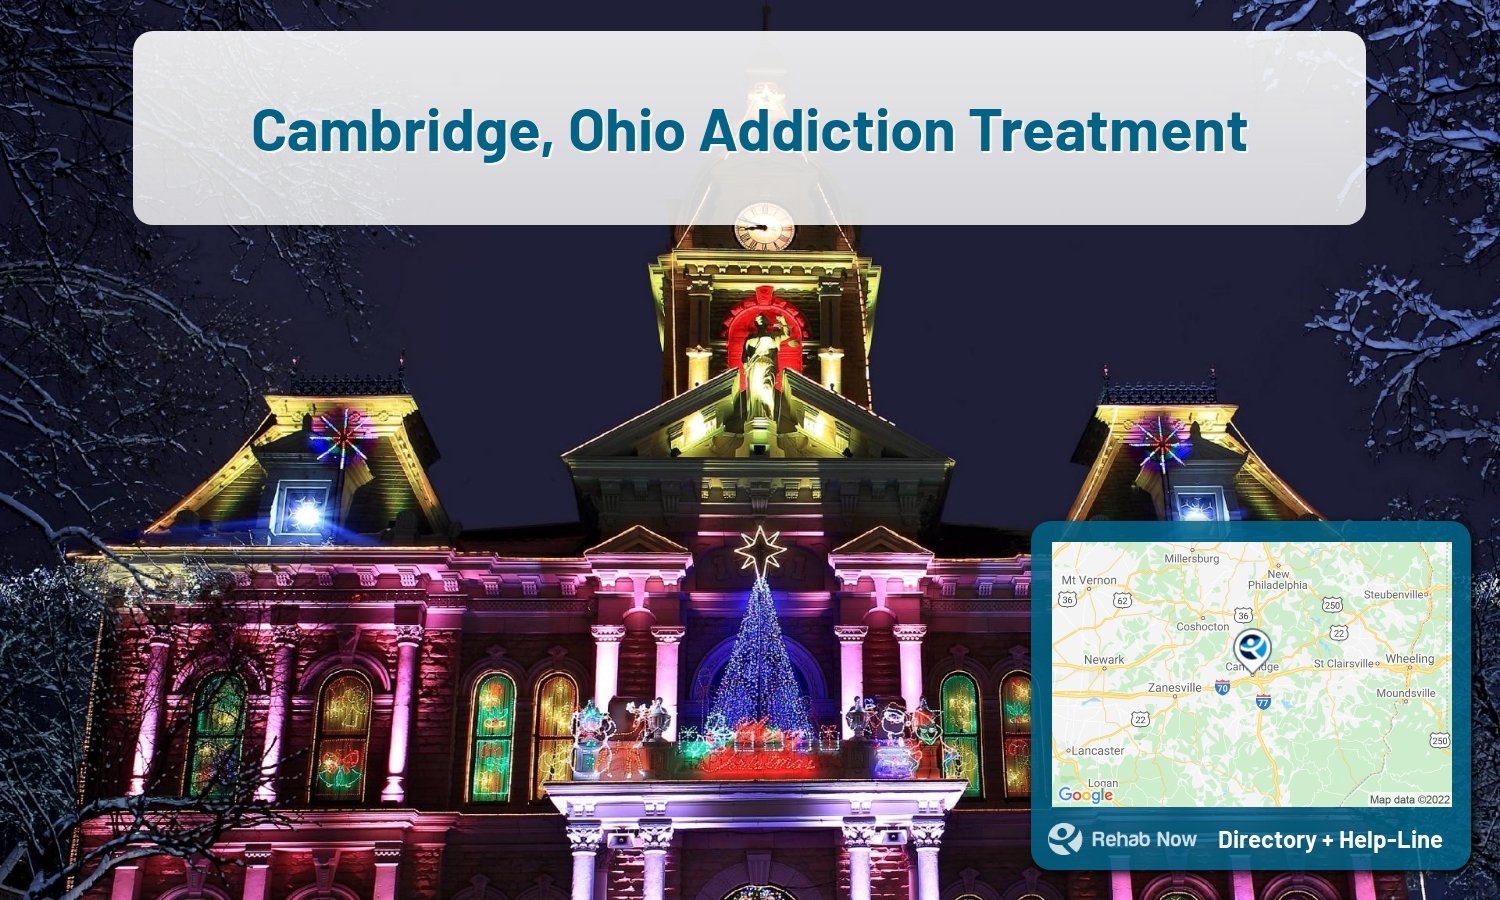 View options, availability, treatment methods, and more, for drug rehab and alcohol treatment in Cambridge, Ohio